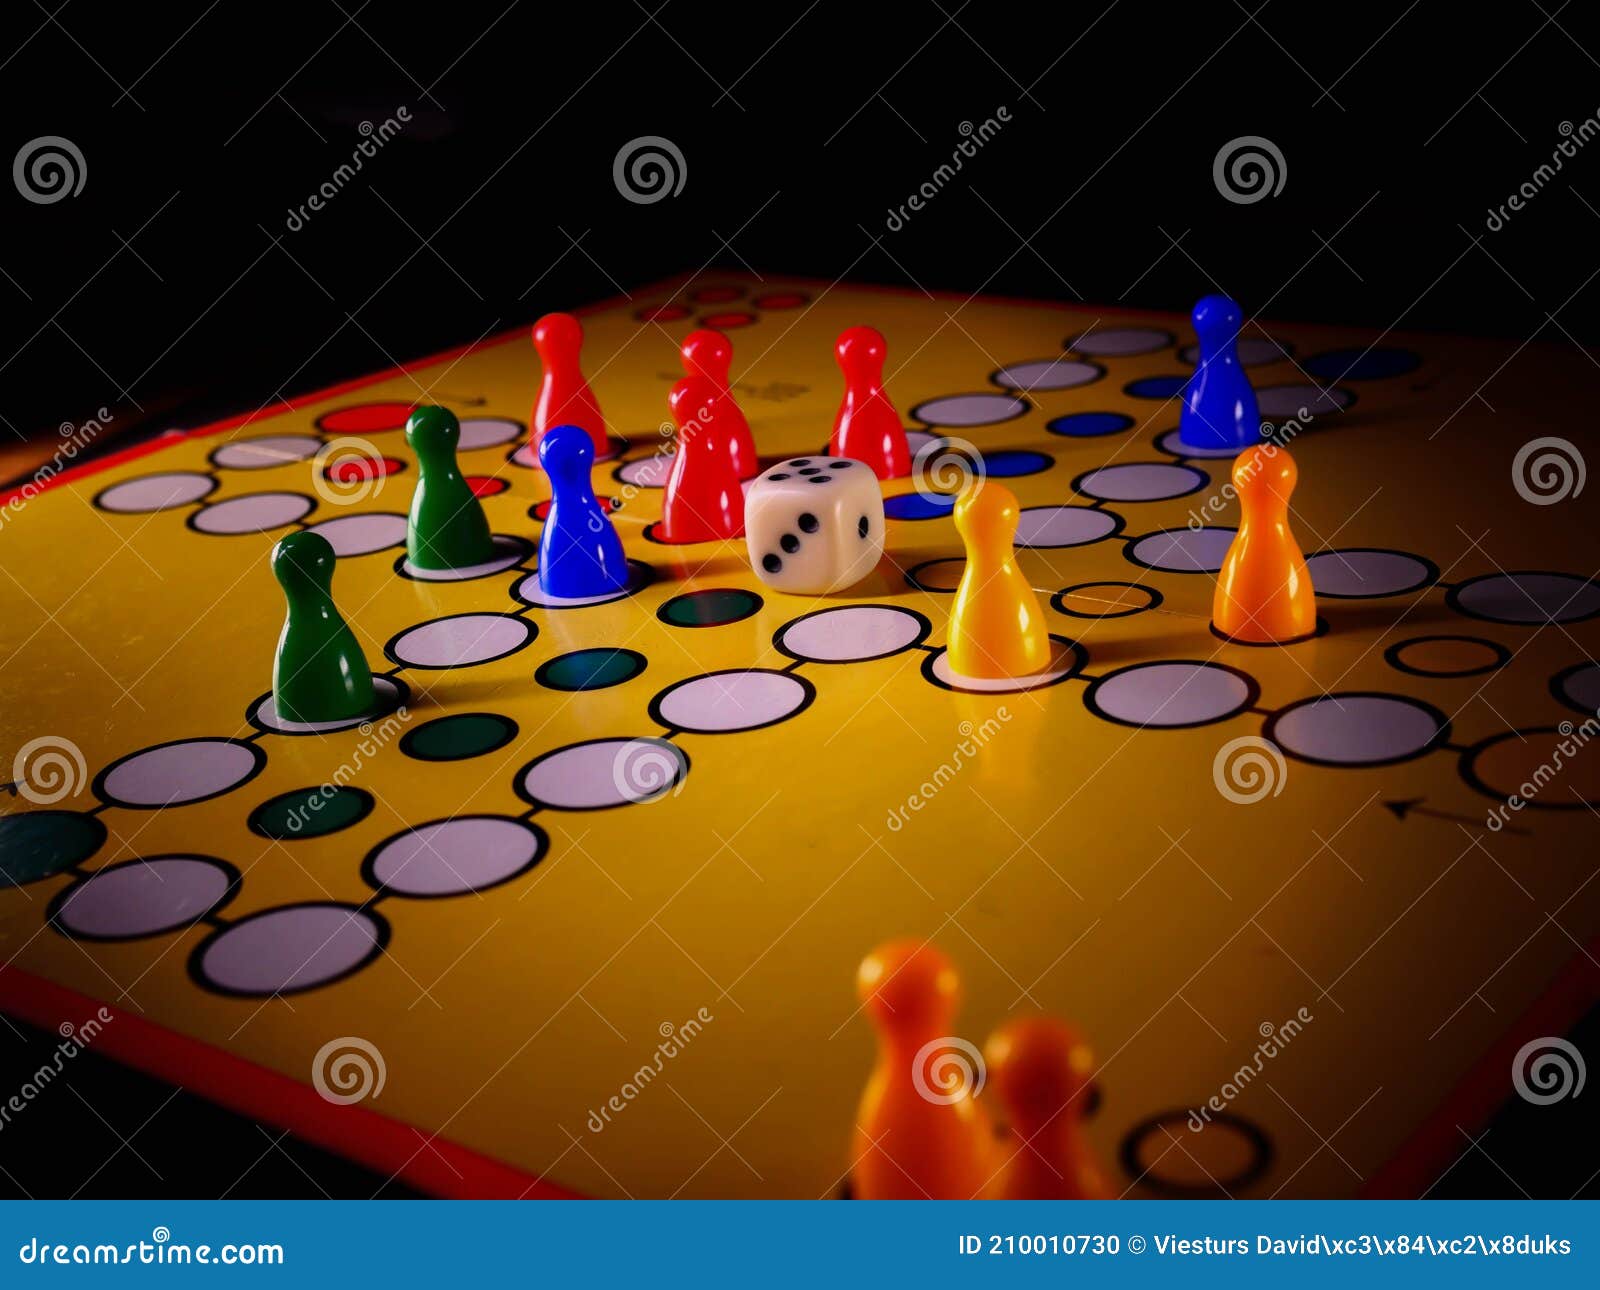 The Concept of Board Games. Dice, Chips and Cards on a Yellow Background  Stock Photo - Image of board, ludo: 210010730